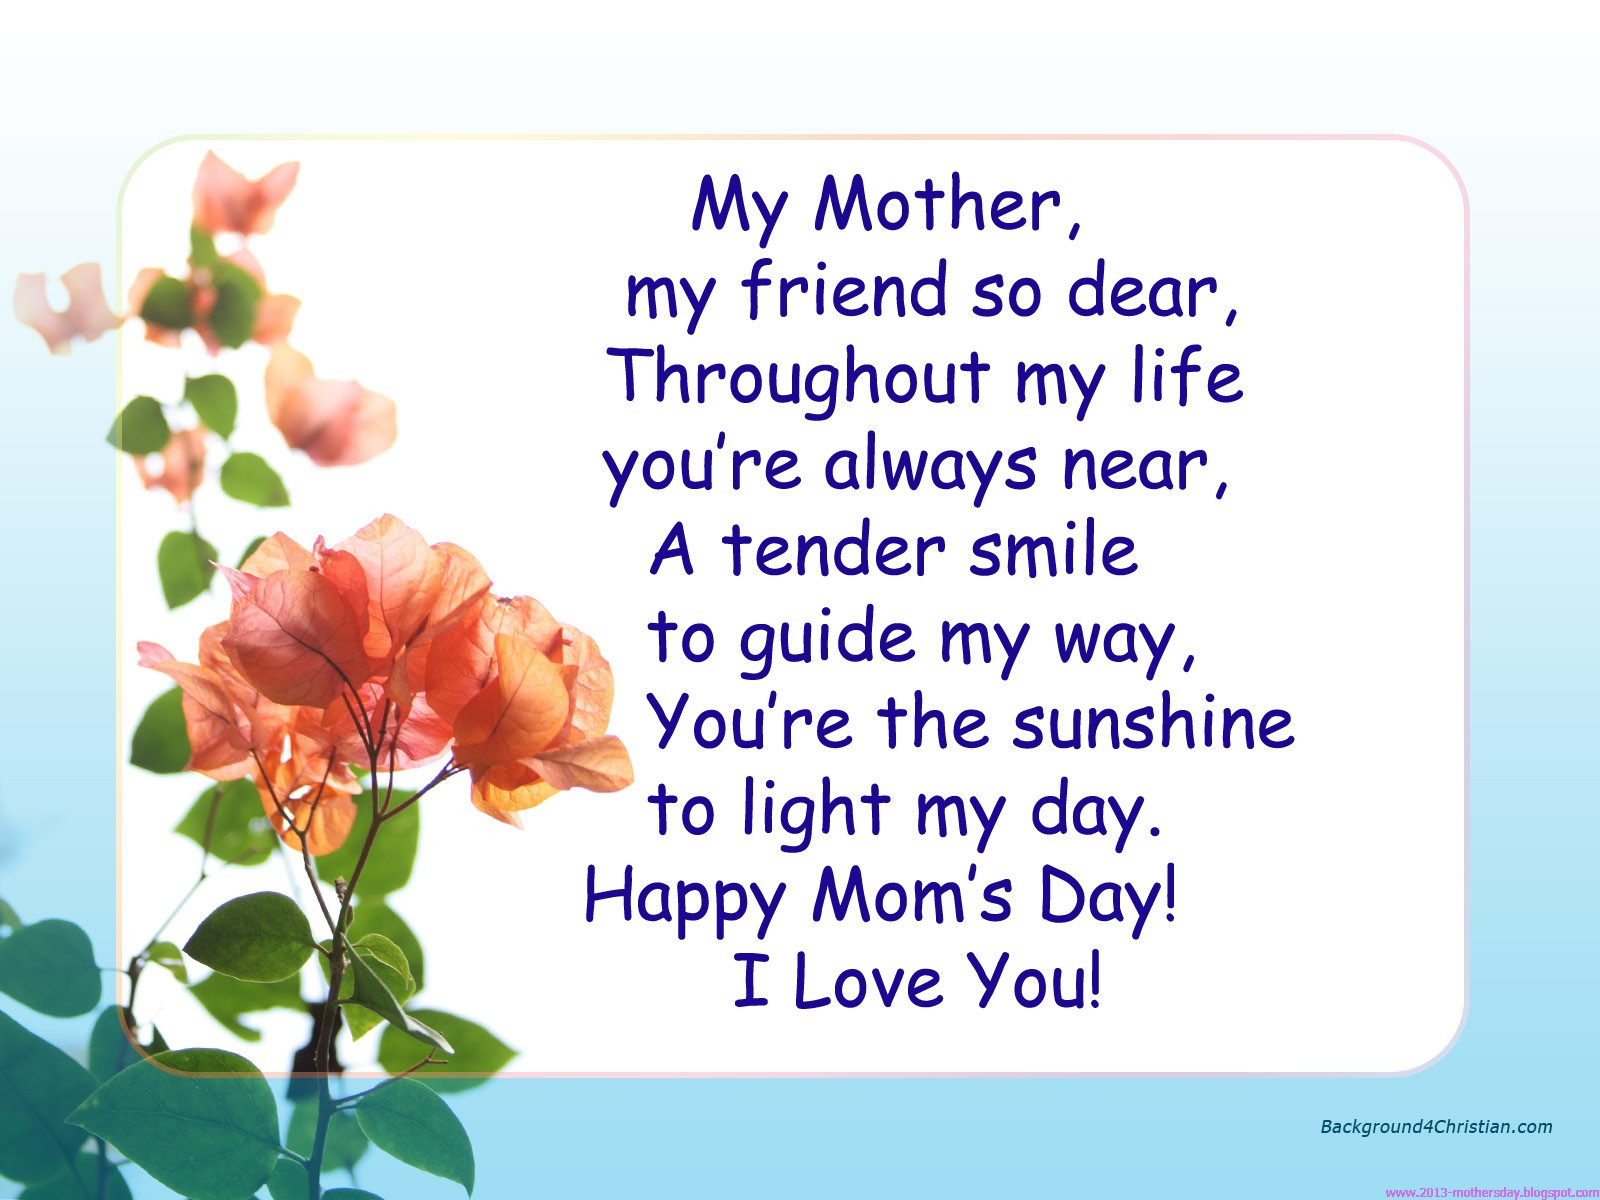 Quote Mothers Day
 The 35 All Time Best Happy Mothers Day Quotes